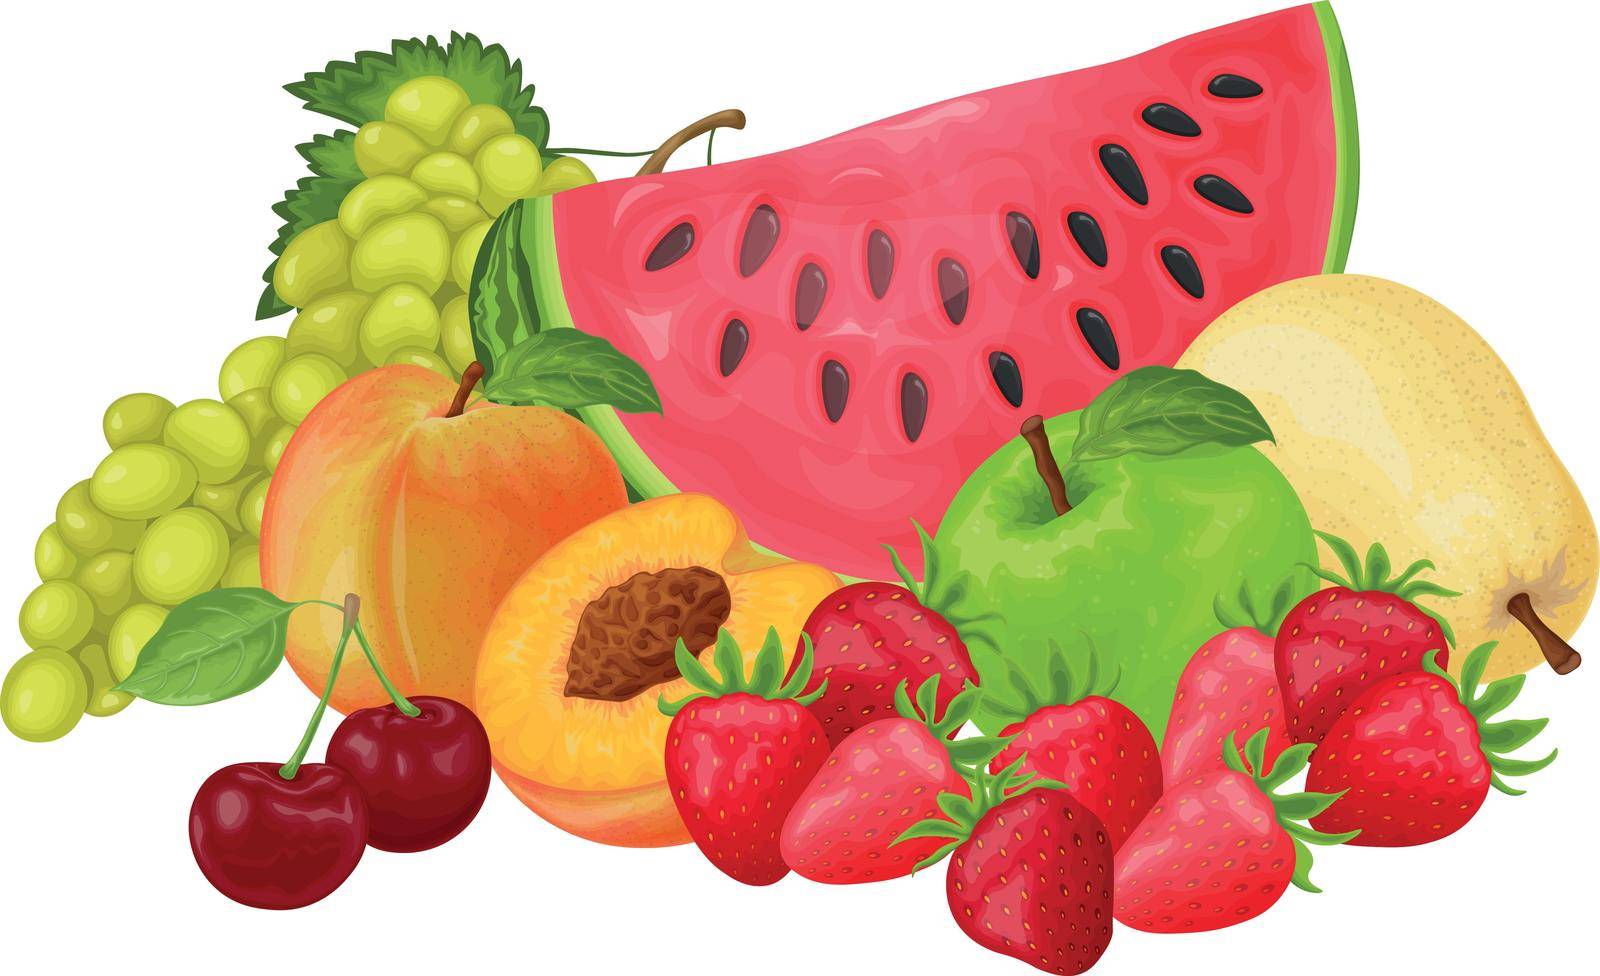 Fruit. The image of fruits such as watermelon, grapes,peach,strawberry and cherry apples and pears. Fruit collection. Still life of fruit. Vector illustration. Fruit set.